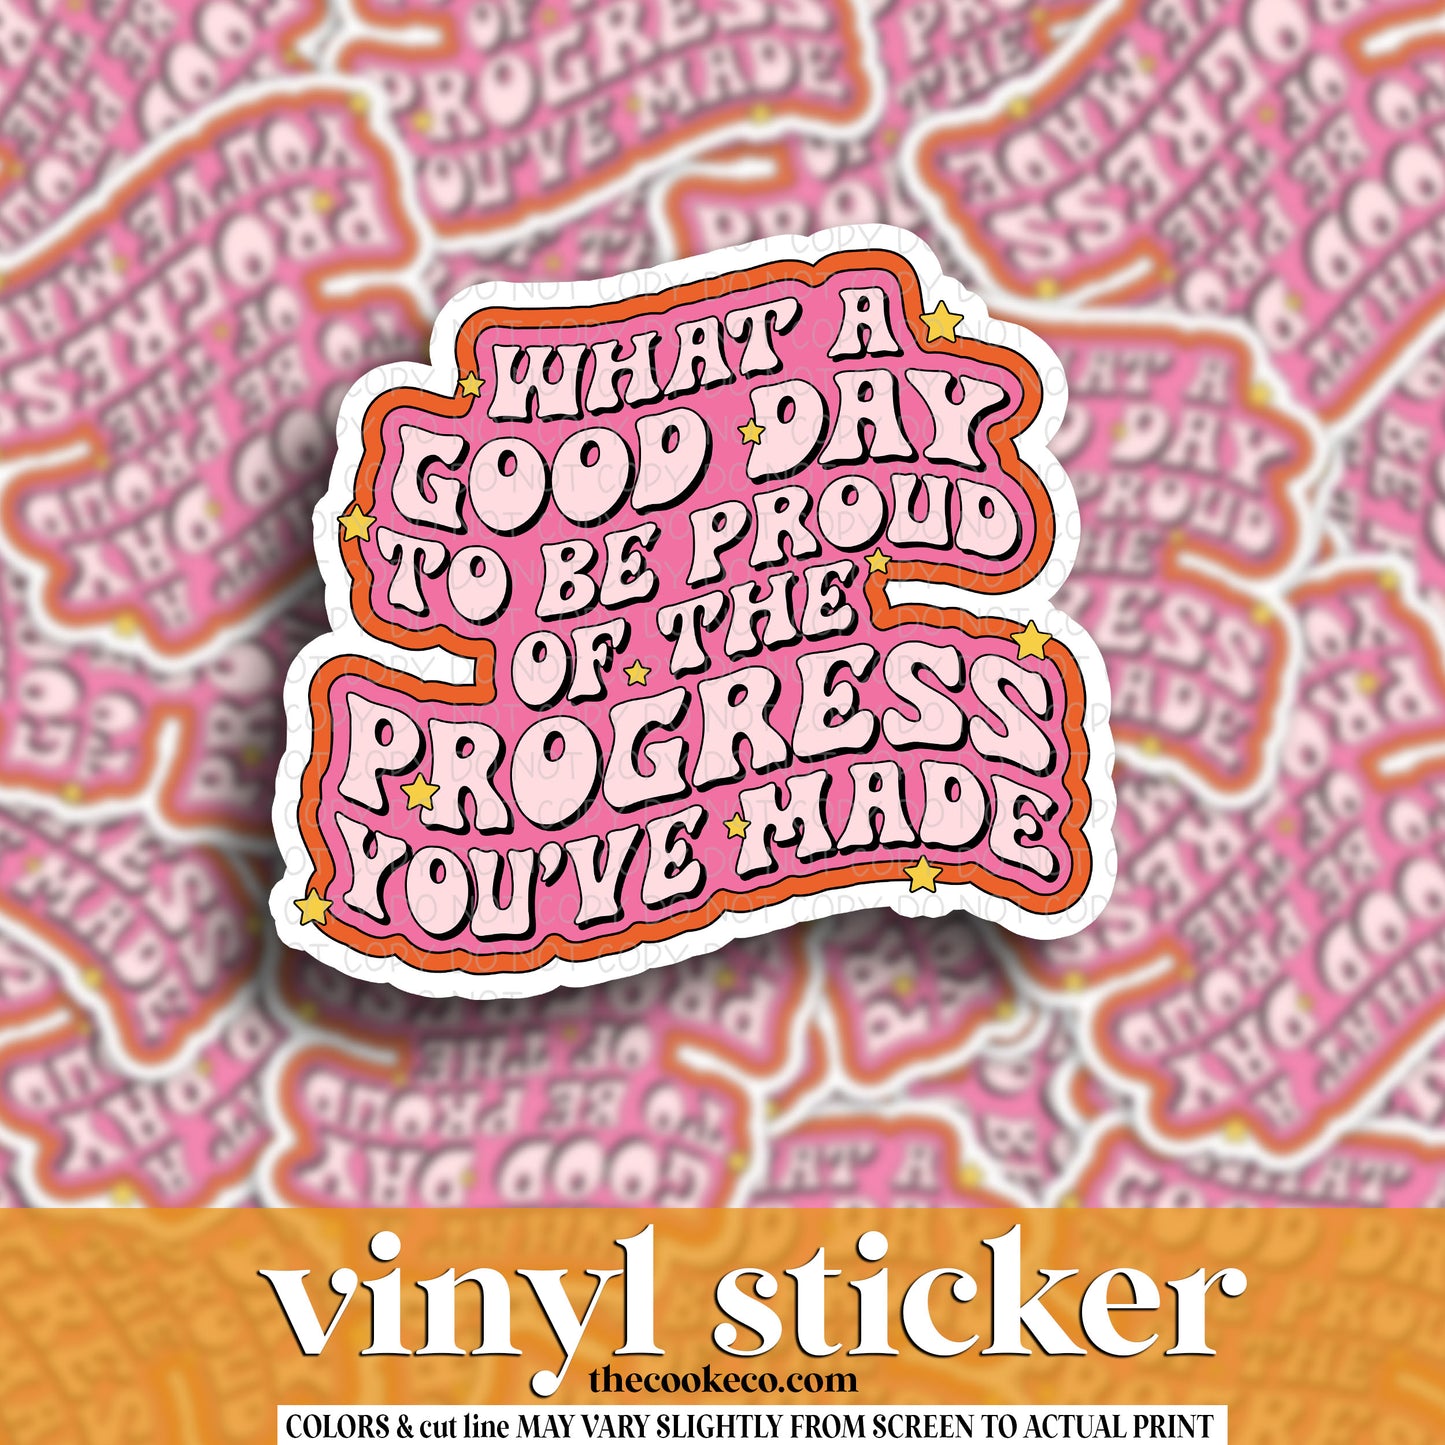 Vinyl Sticker | #V1590 -  WHAT A GOOD DAY TO BE PROUD OF THE PROGRESS YOU'VE MADE